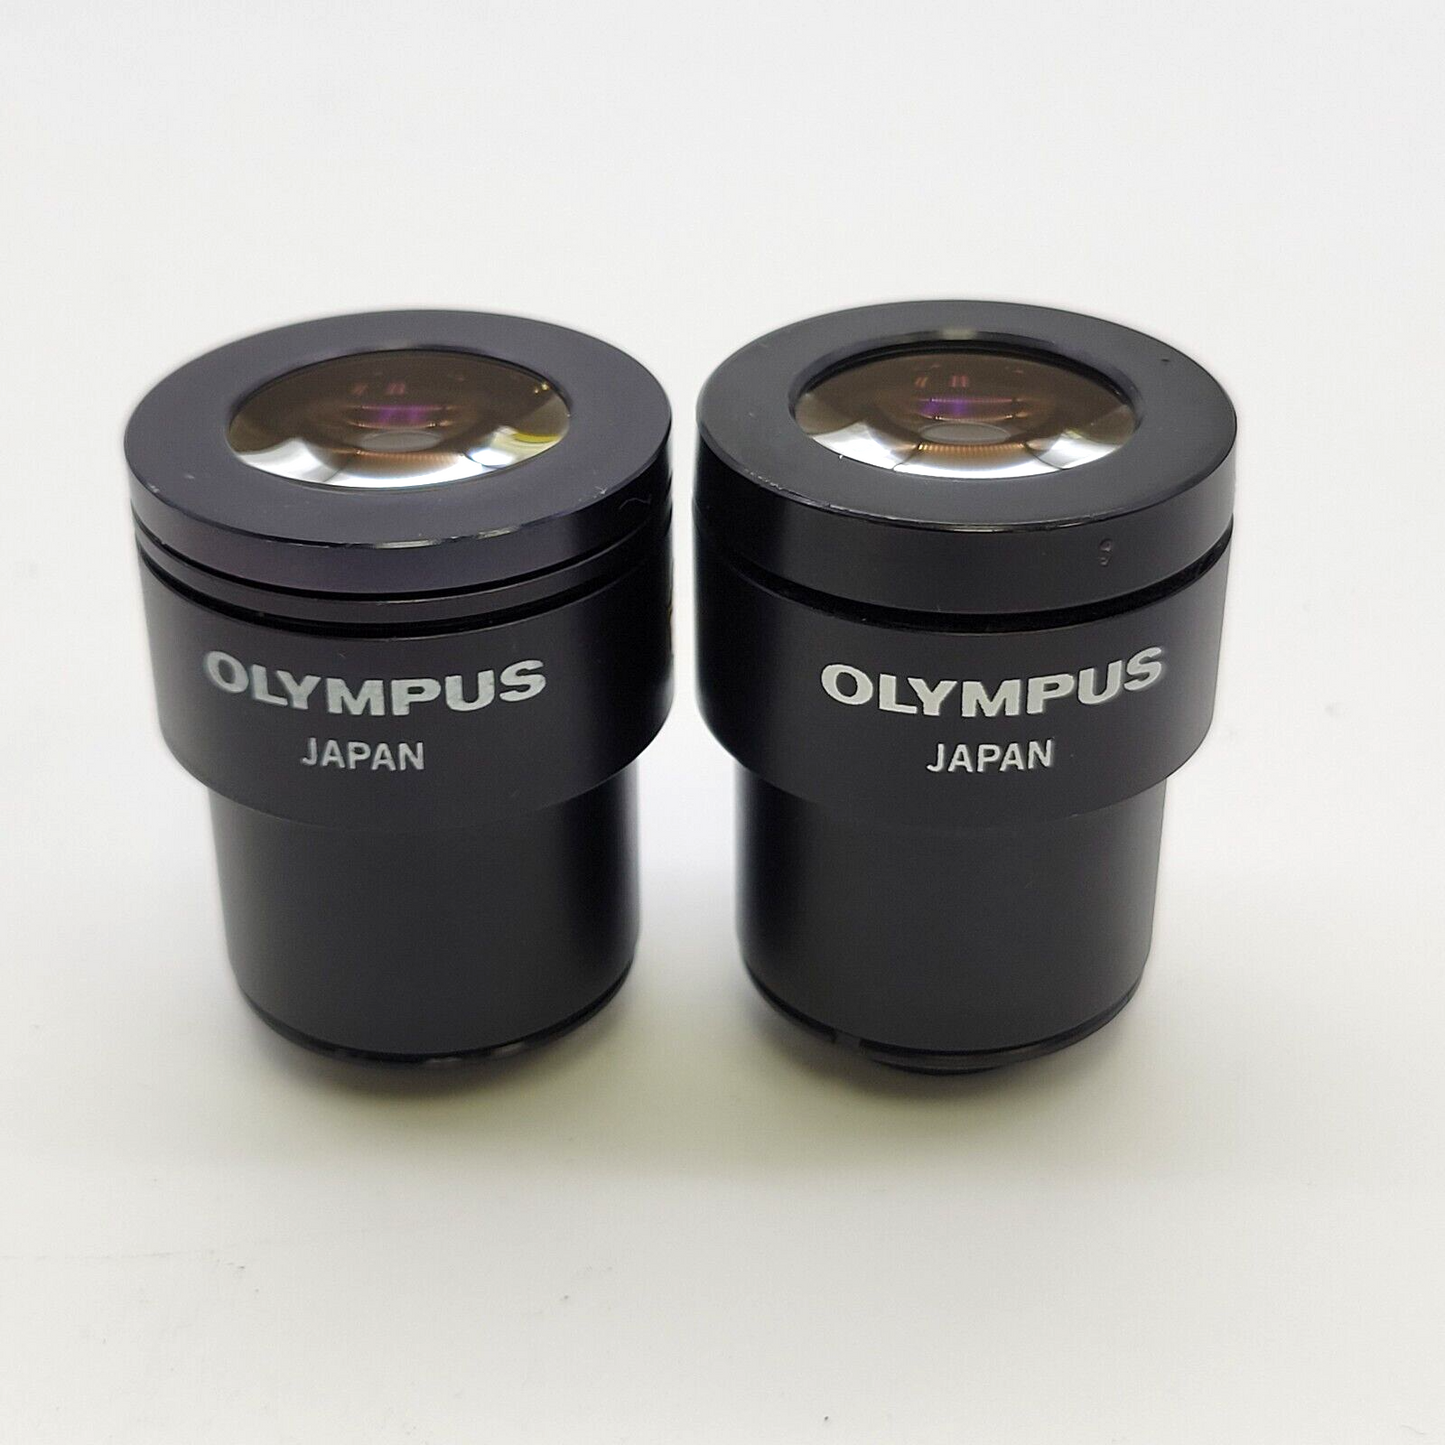 Olympus Stereo Microscope Eyepieces GSWH 20x / 12.5 - microscopemarketplace